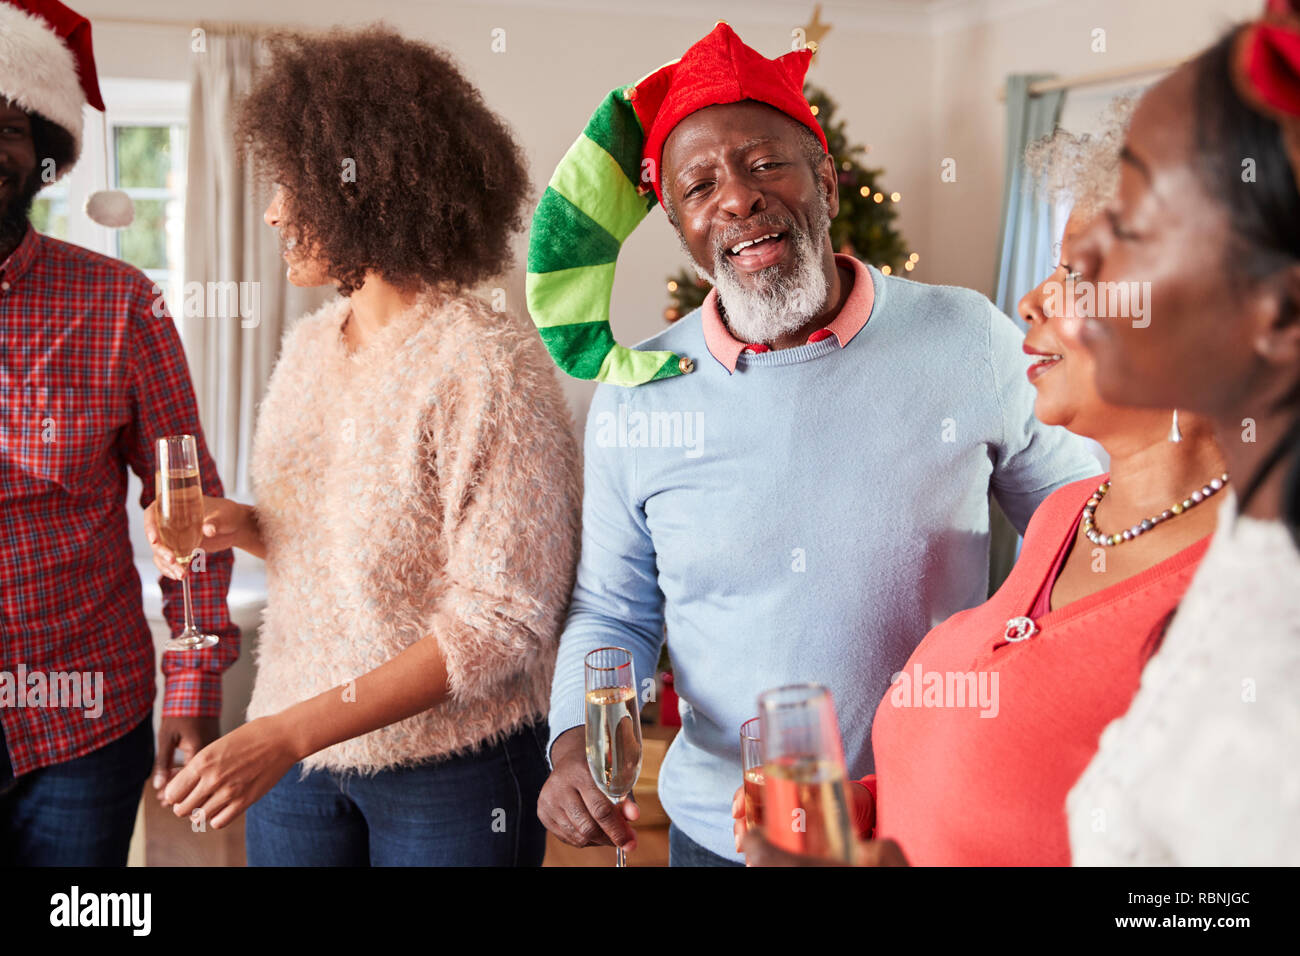 Parents With Adult Offspring Drinking Champagne As They Celebrate Christmas At Home Together Stock Photo